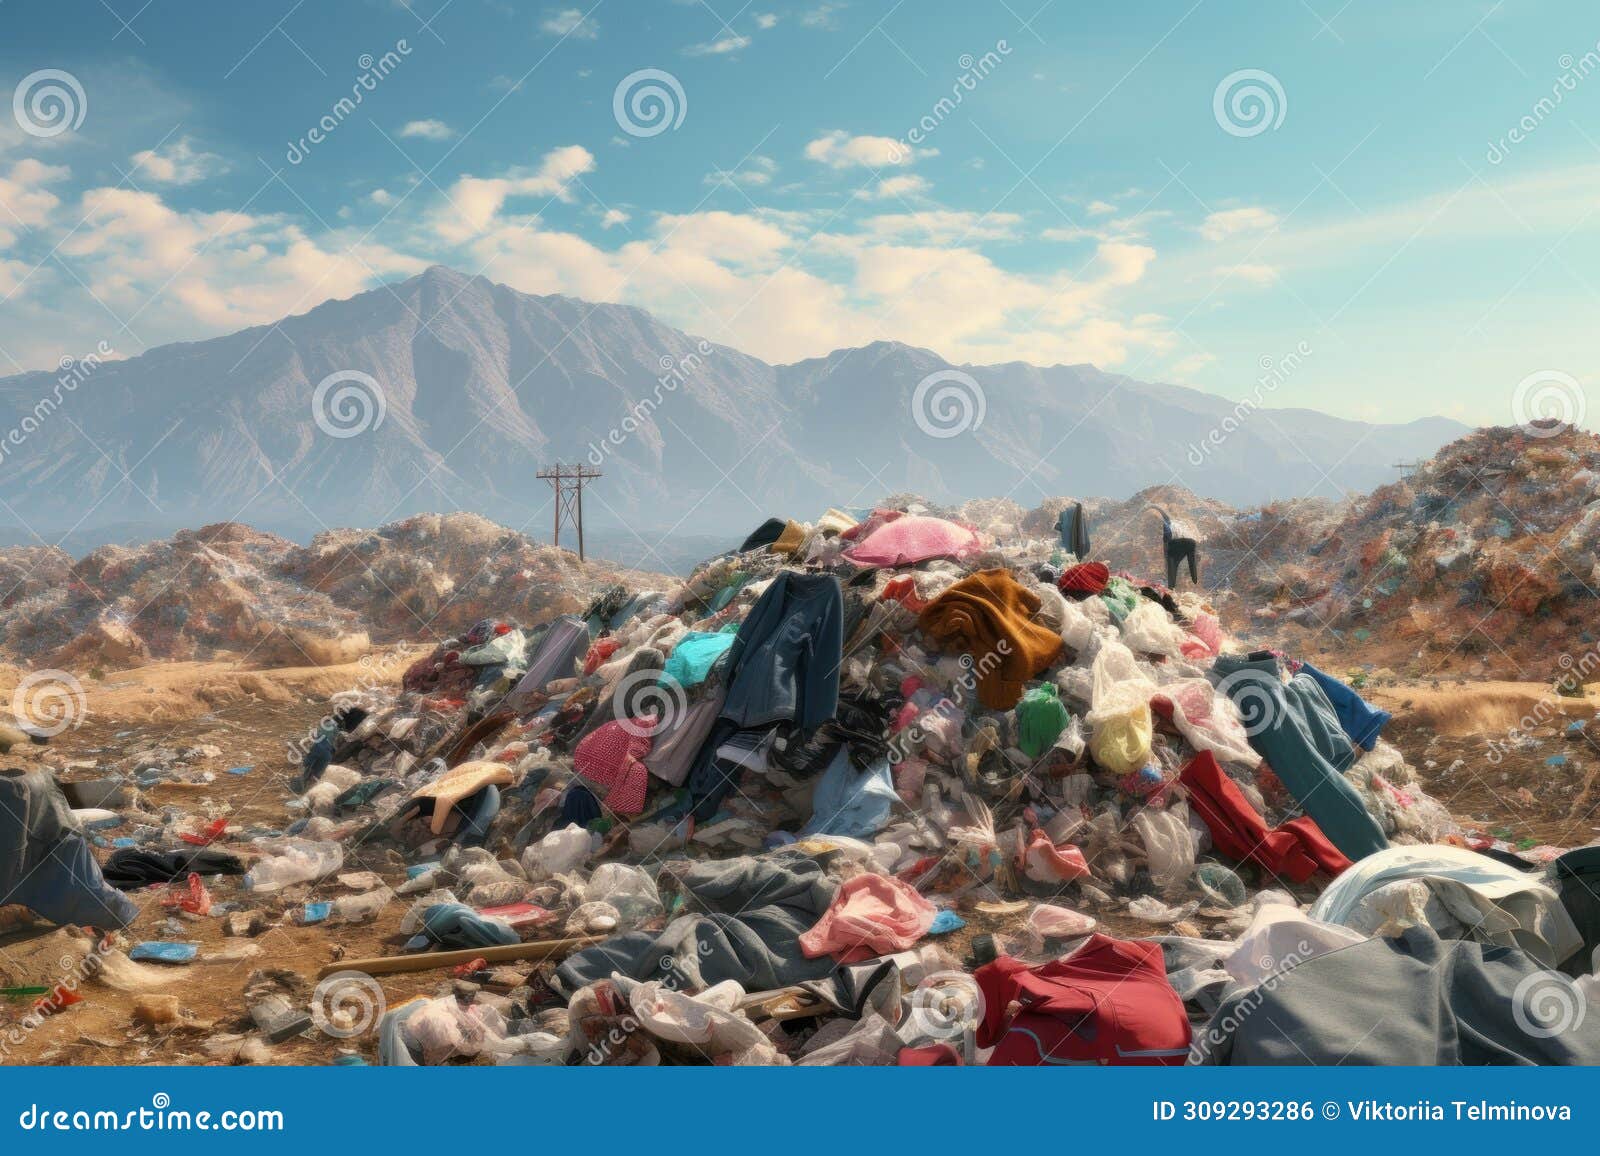 huge piles of unnecessary clothes in the landfill. the problem of overproduction